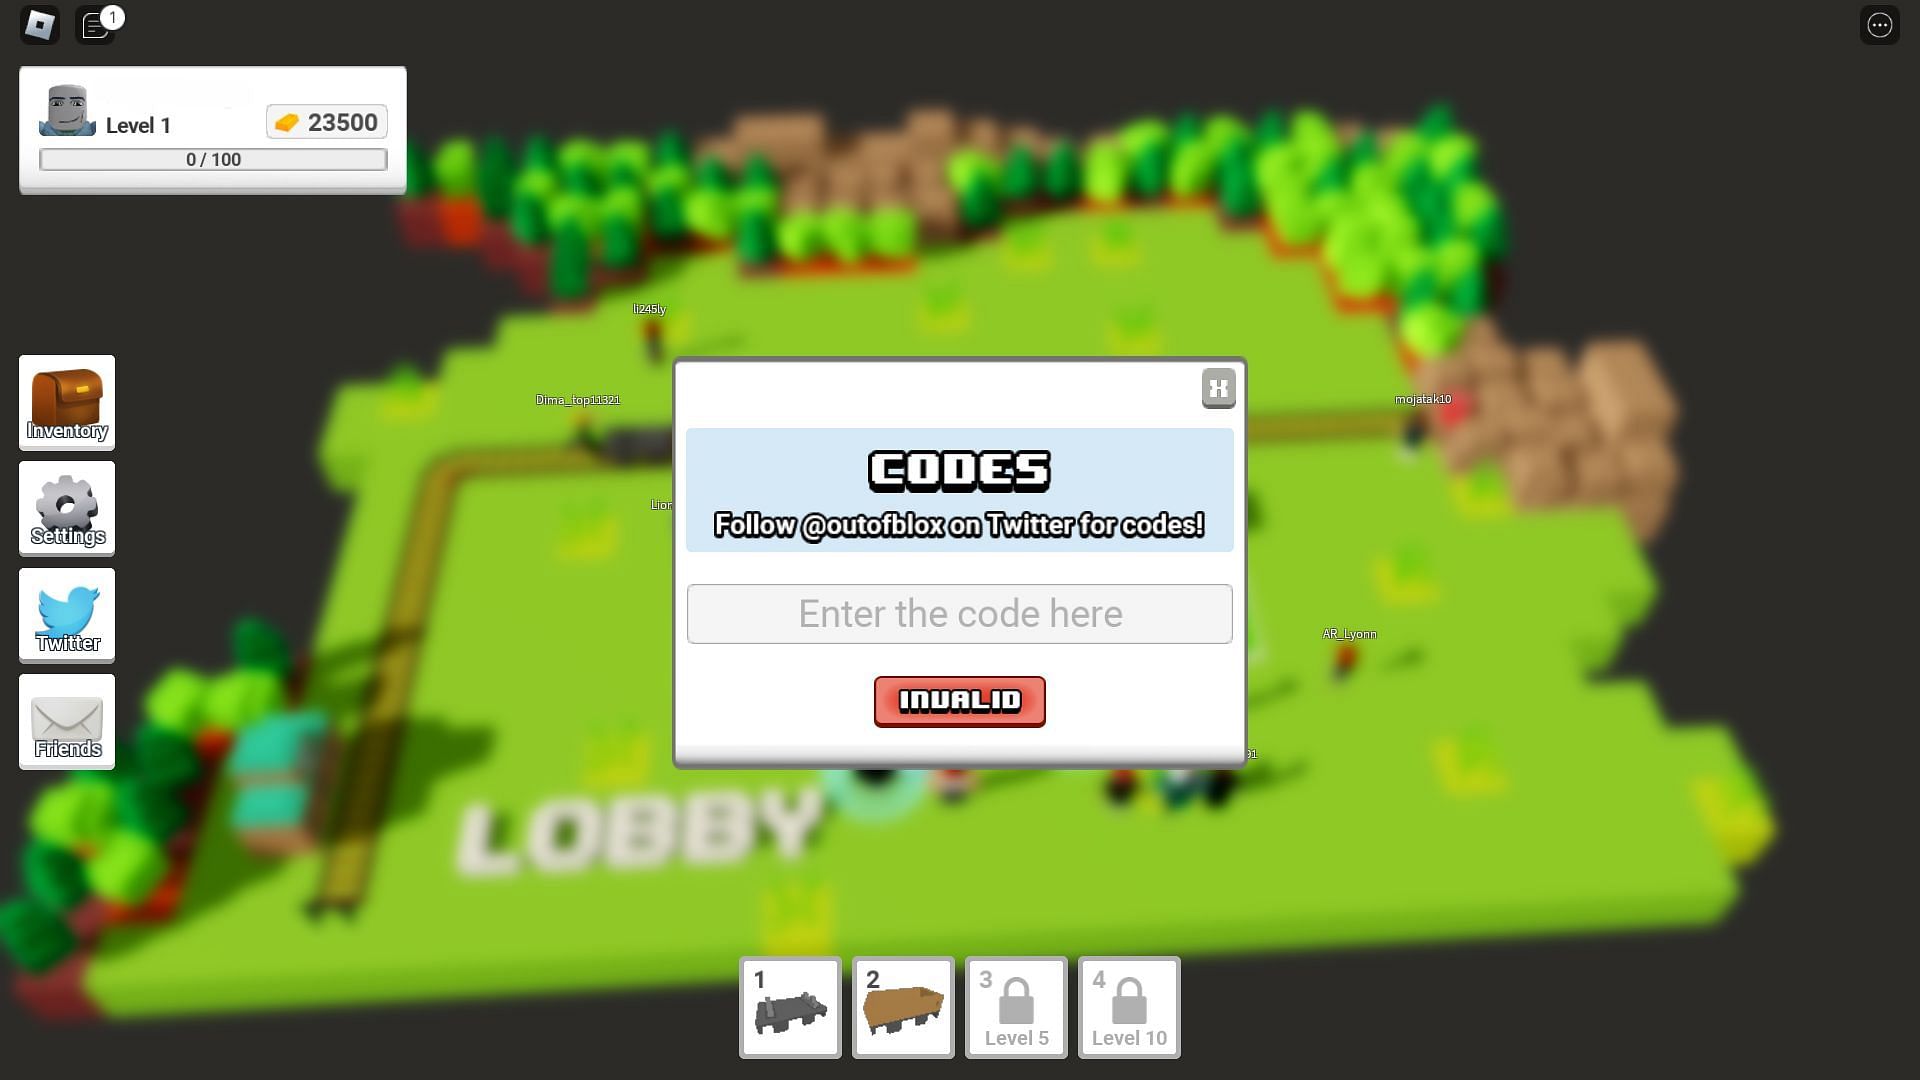 Troubleshooting codes for Rail Frenzy (Image via Roblox)